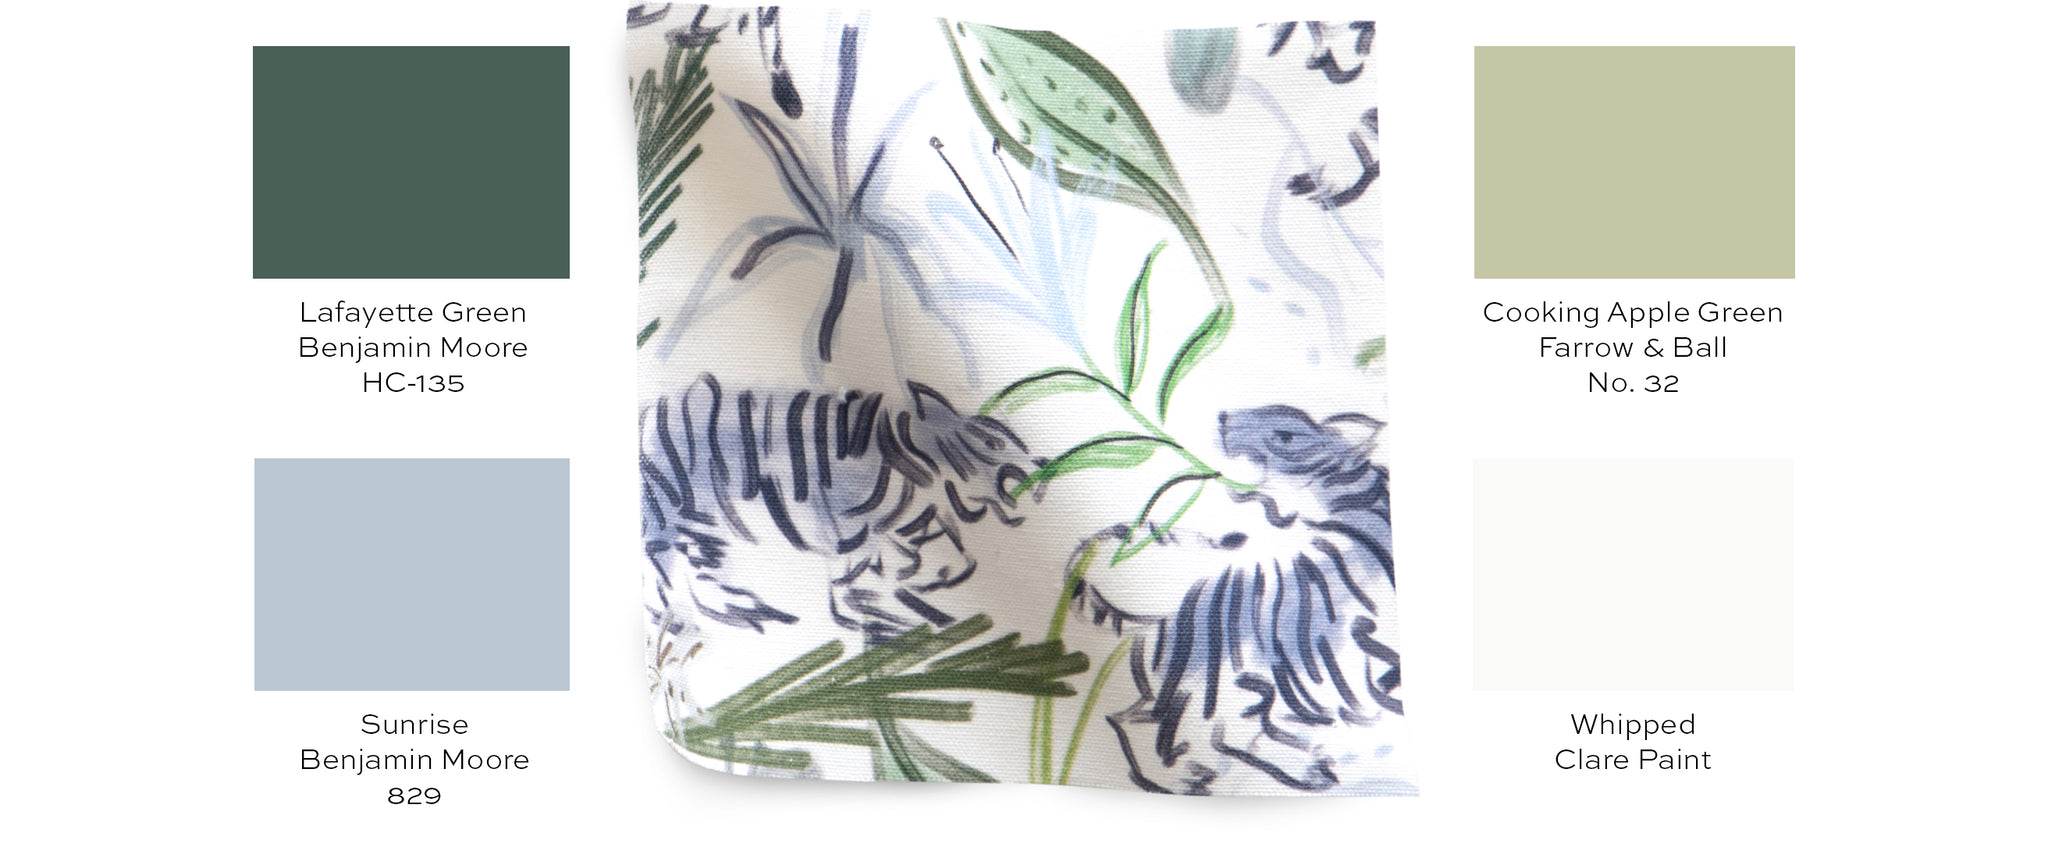 Paint guide for blue and green chinoiserie tiger fabric